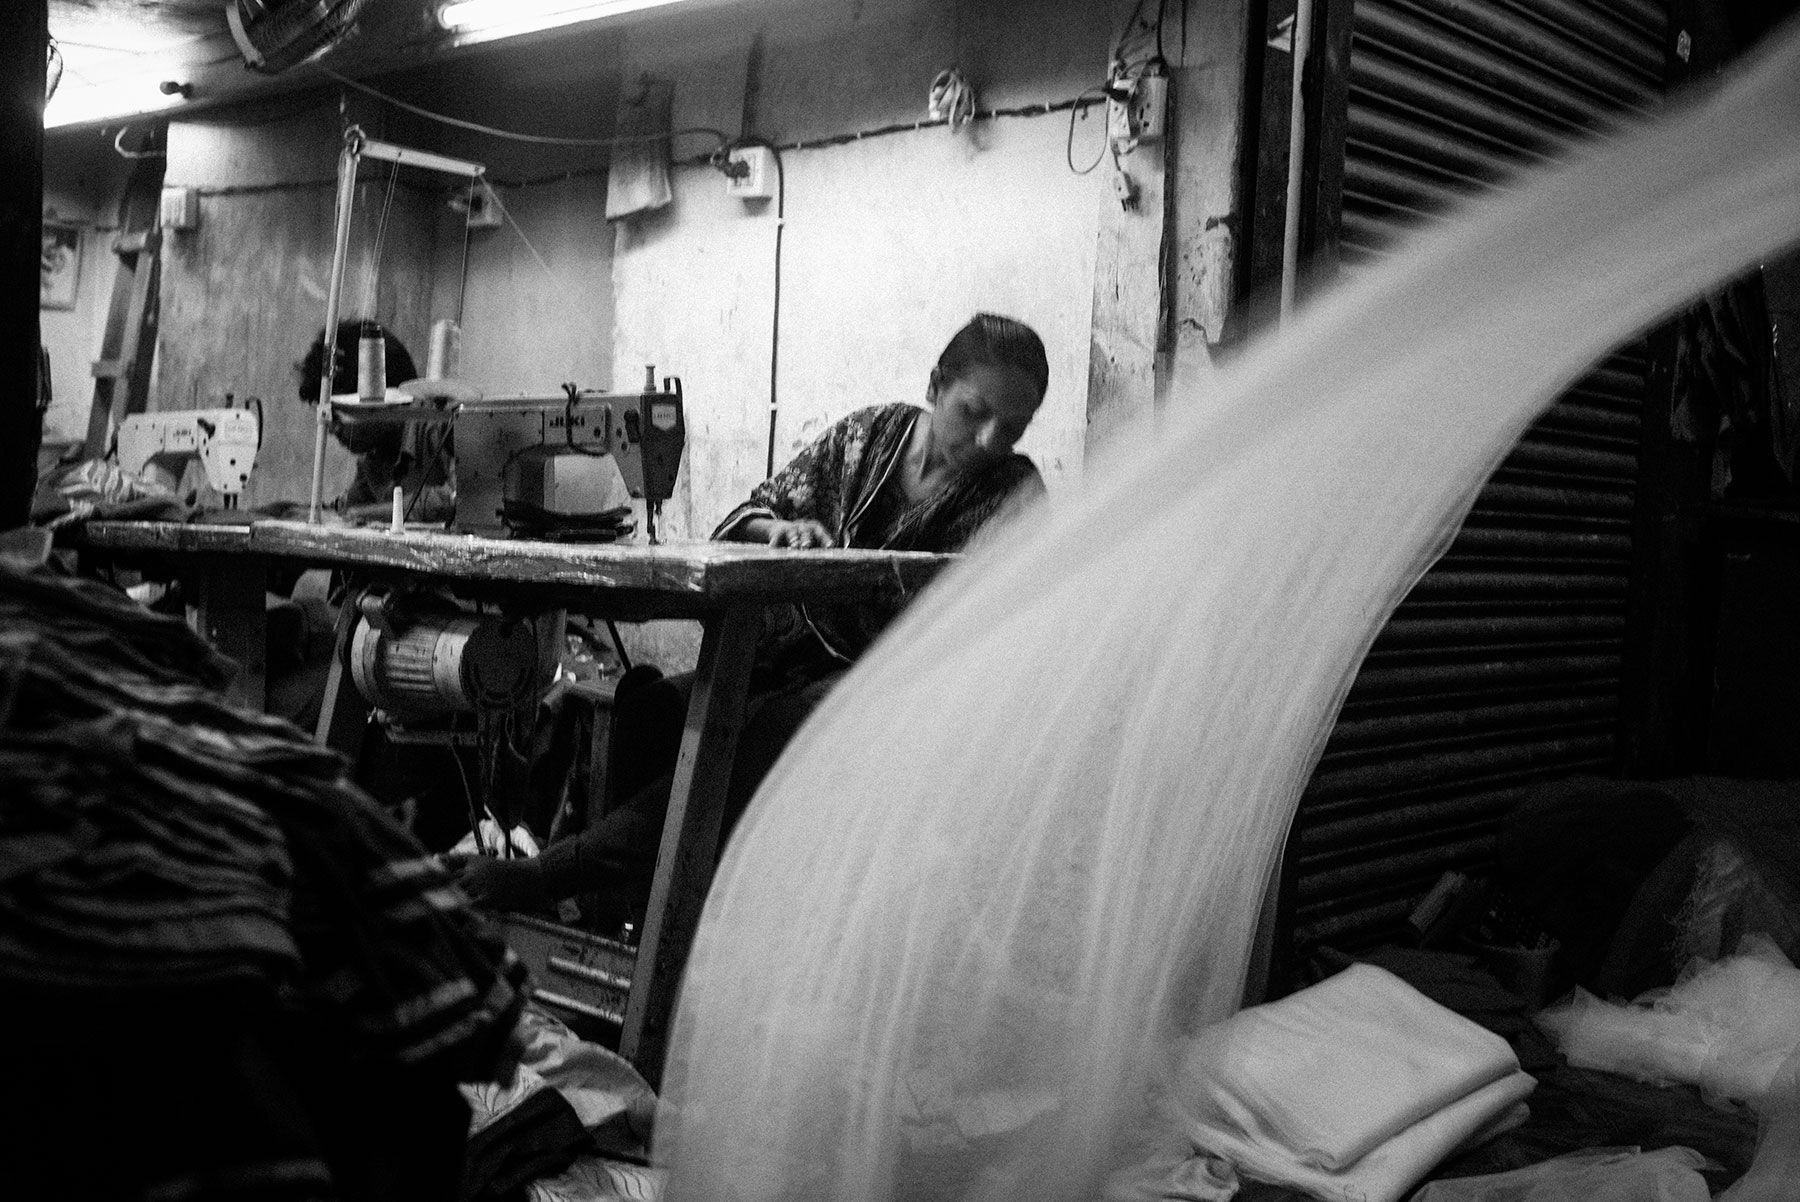 A garment worker sews at her station in a factory in Dhaka. Image by Jošt Franko. Bangladesh, 2016.